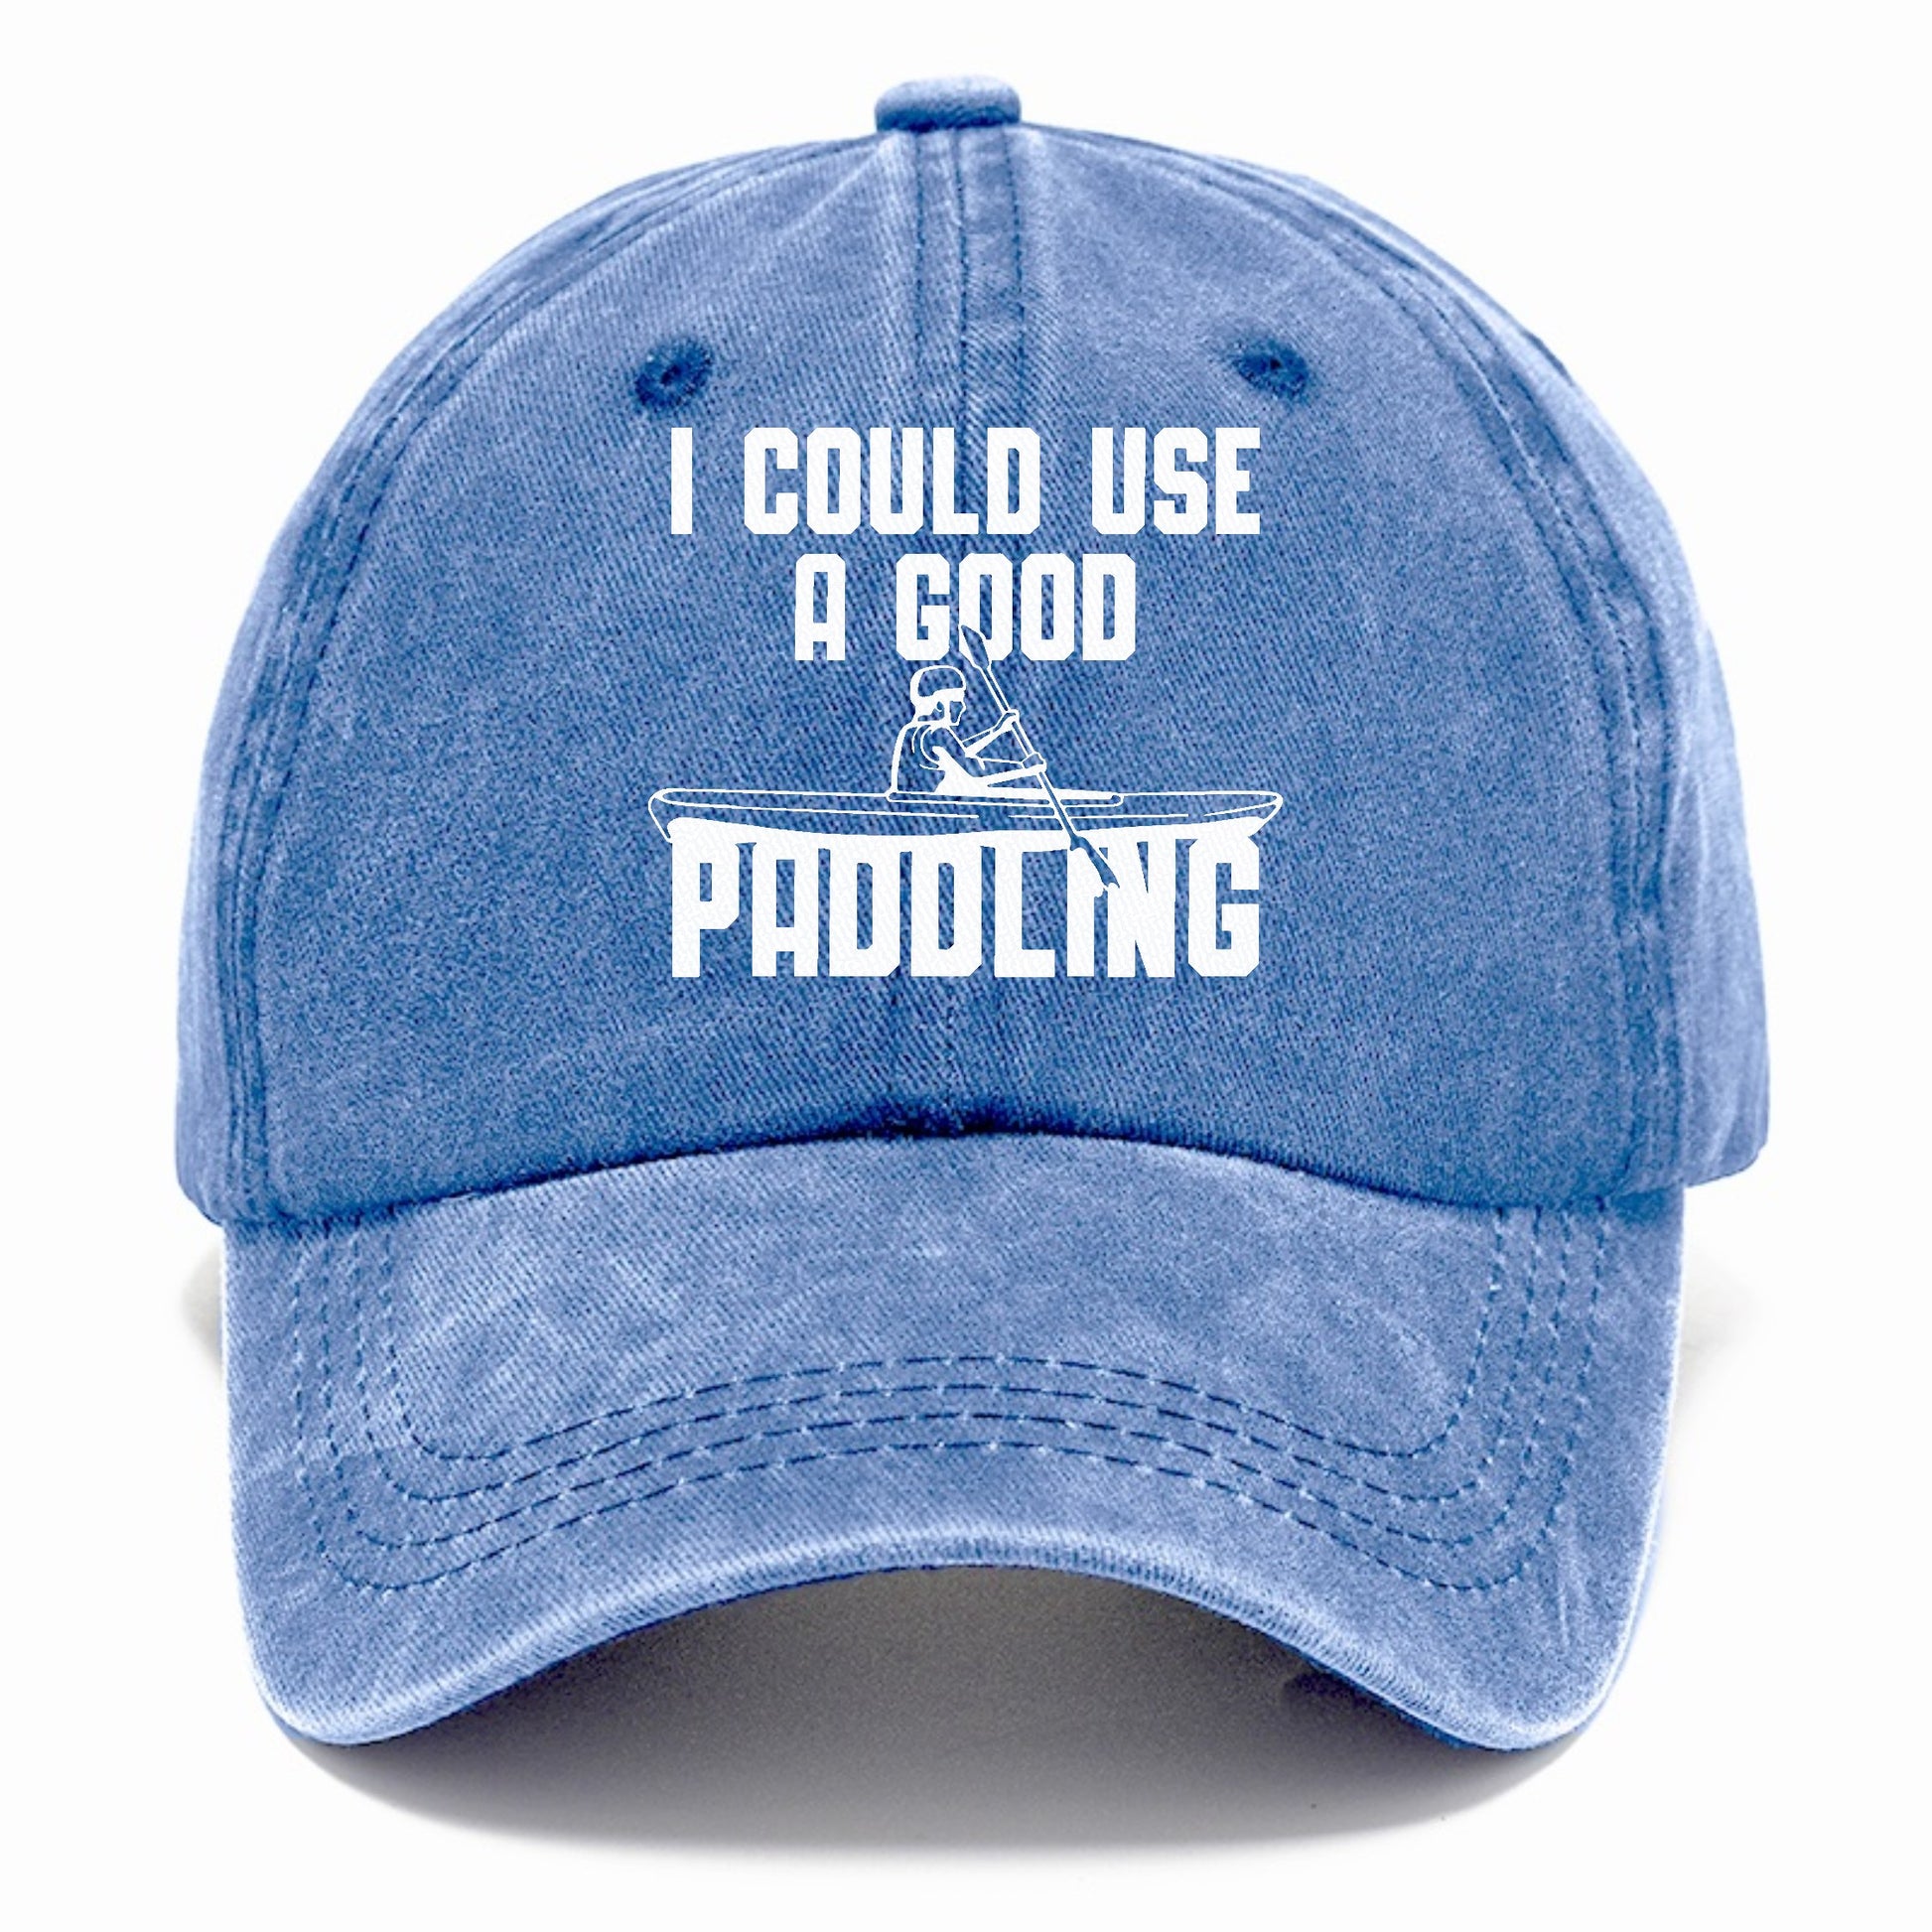 i could use a good paddling! Hat